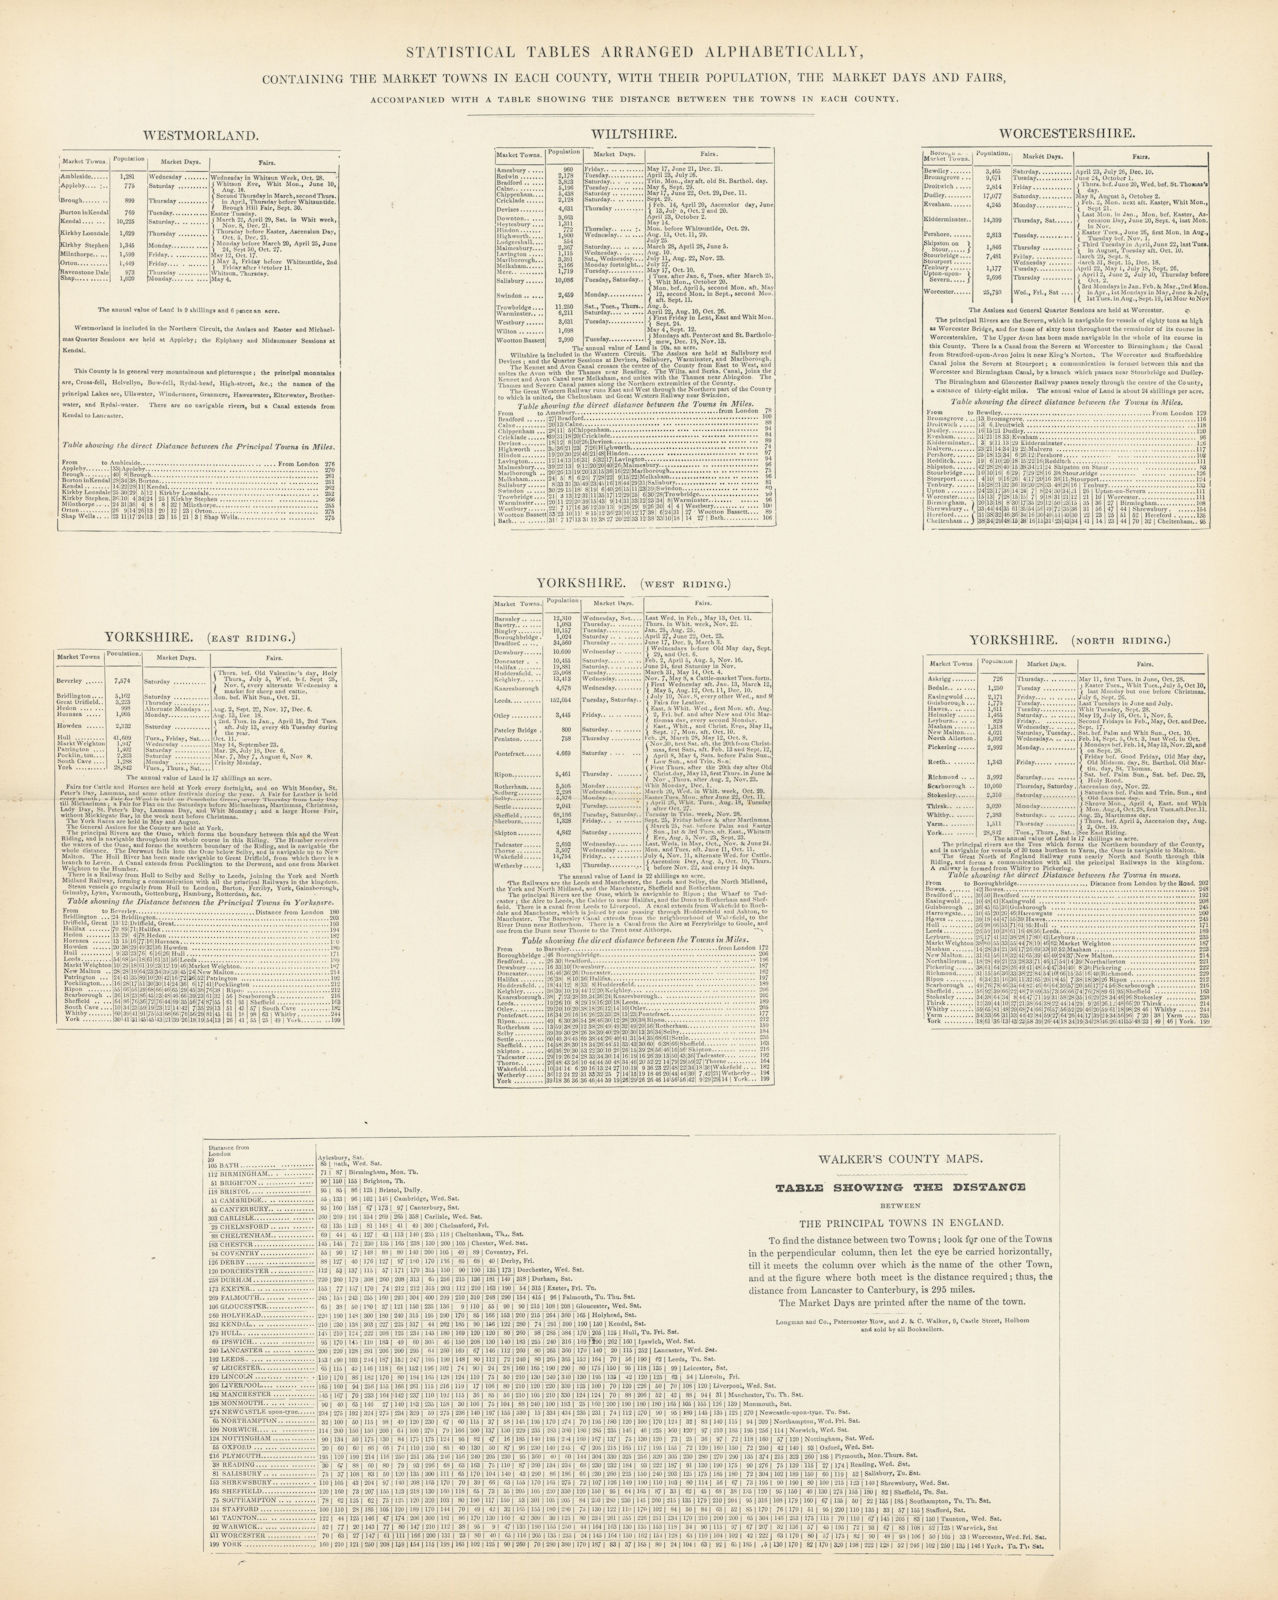 Market Towns, days, fairs & population by county. Westmorland-Yorkshire 1870